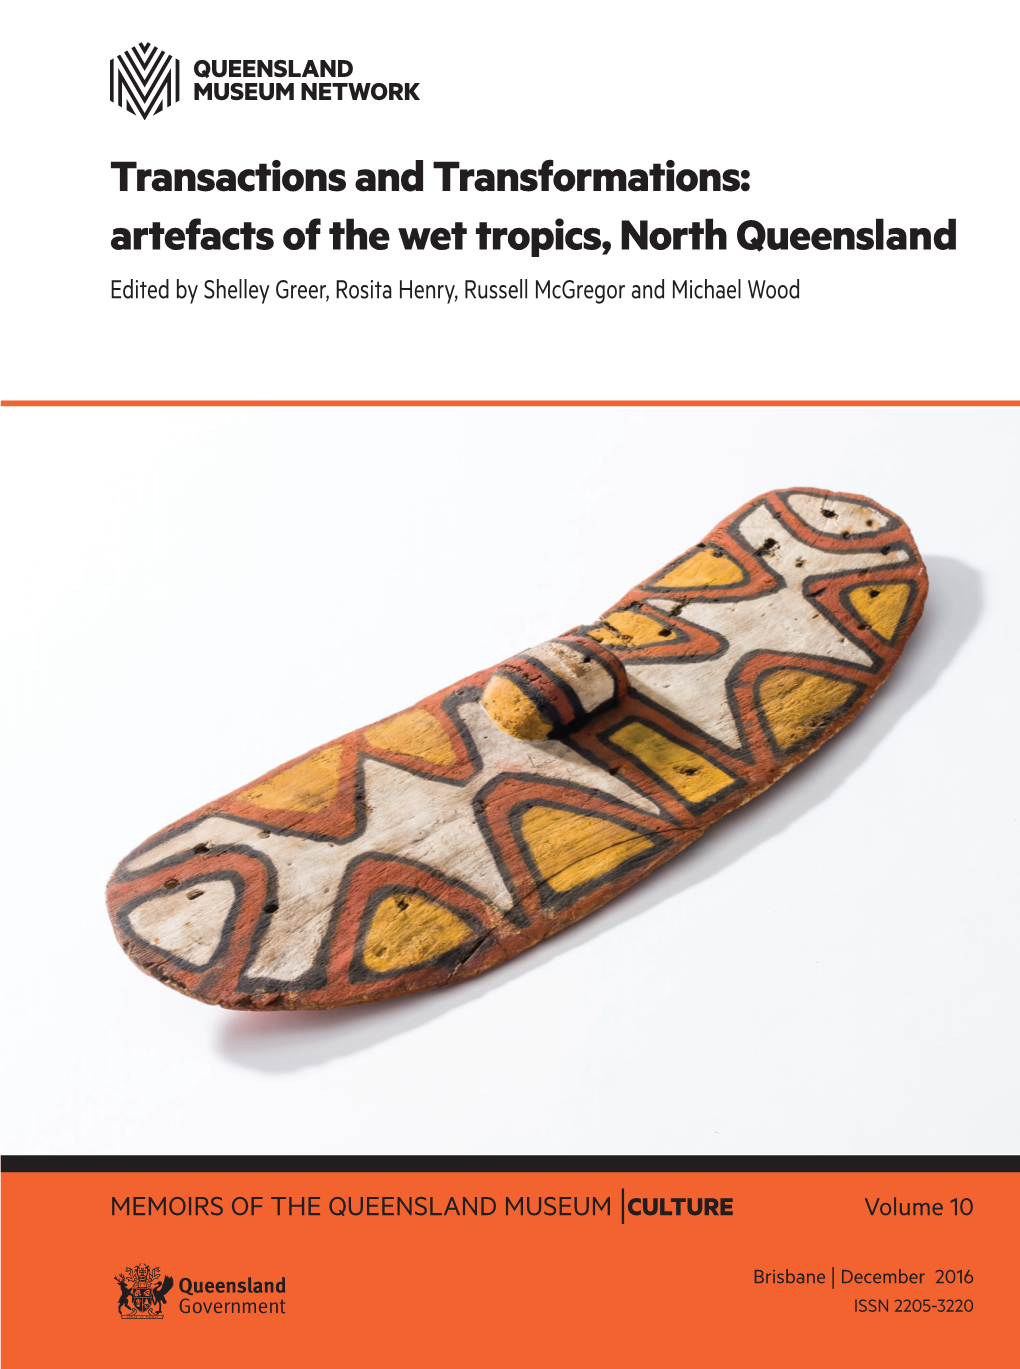 Transactions and Transformations: Artefacts of the Wet Tropics, North Queensland Edited by Shelley Greer, Rosita Henry, Russell Mcgregor and Michael Wood